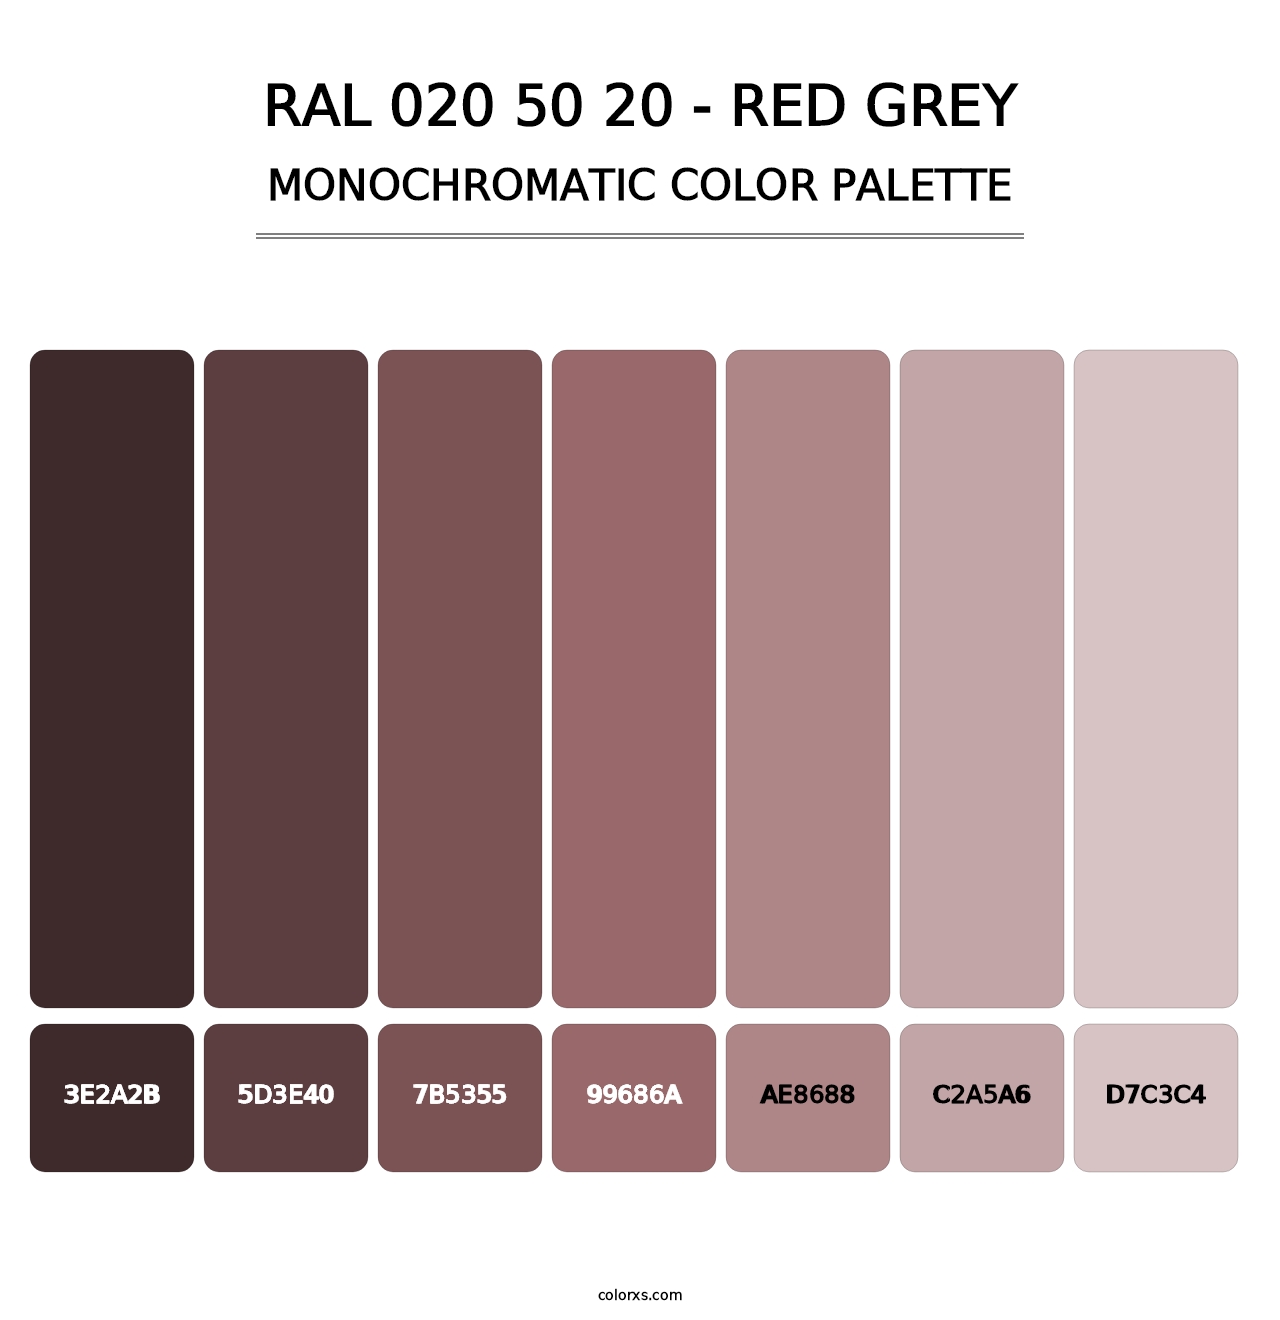 RAL 020 50 20 - Red Grey - Monochromatic Color Palette